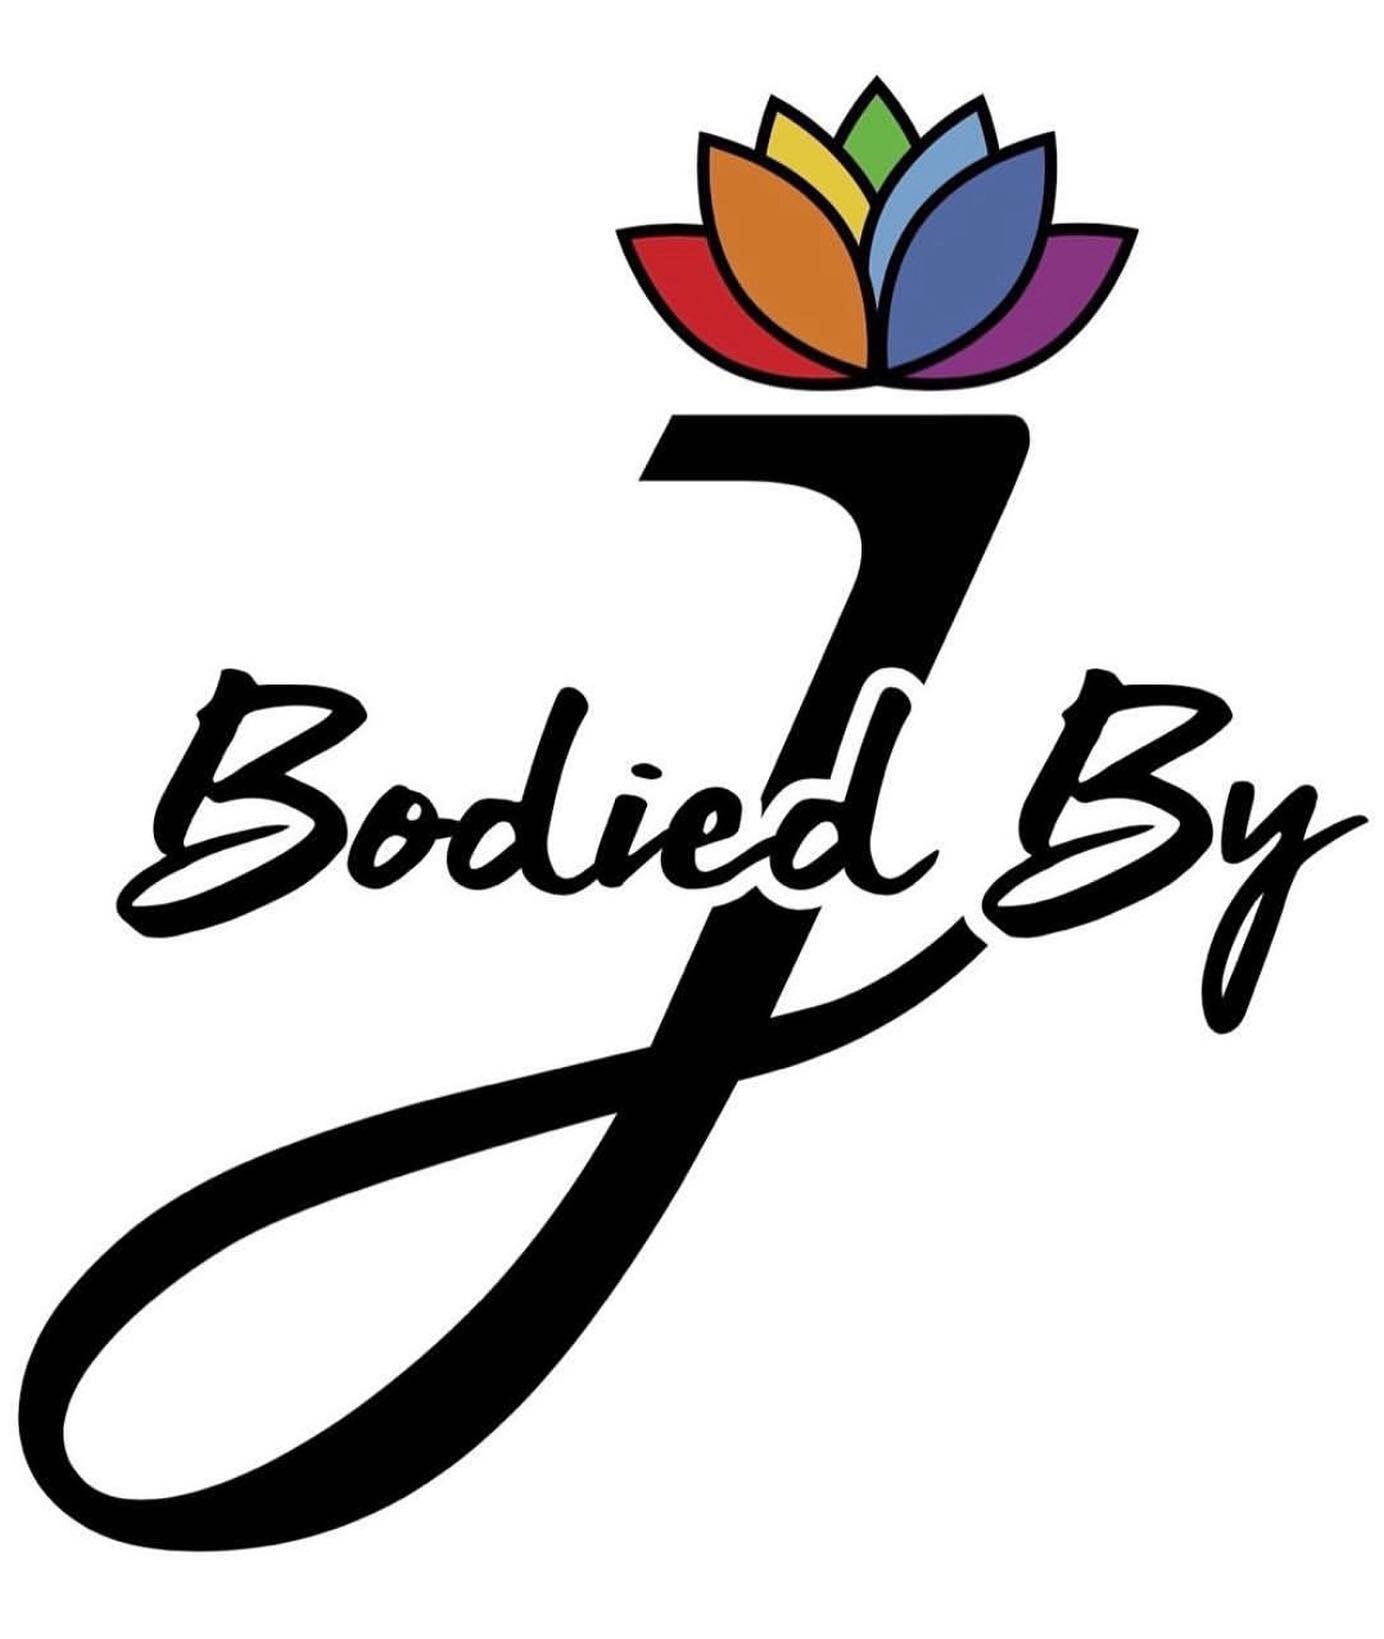 Bodied By J has been one of the best things that has ever happened to me! Lots of hard work and dedication but definitely worth the ride! This is just to say to all entrepreneurs &amp; especially those of small businesses, keep going, keep growing! Y